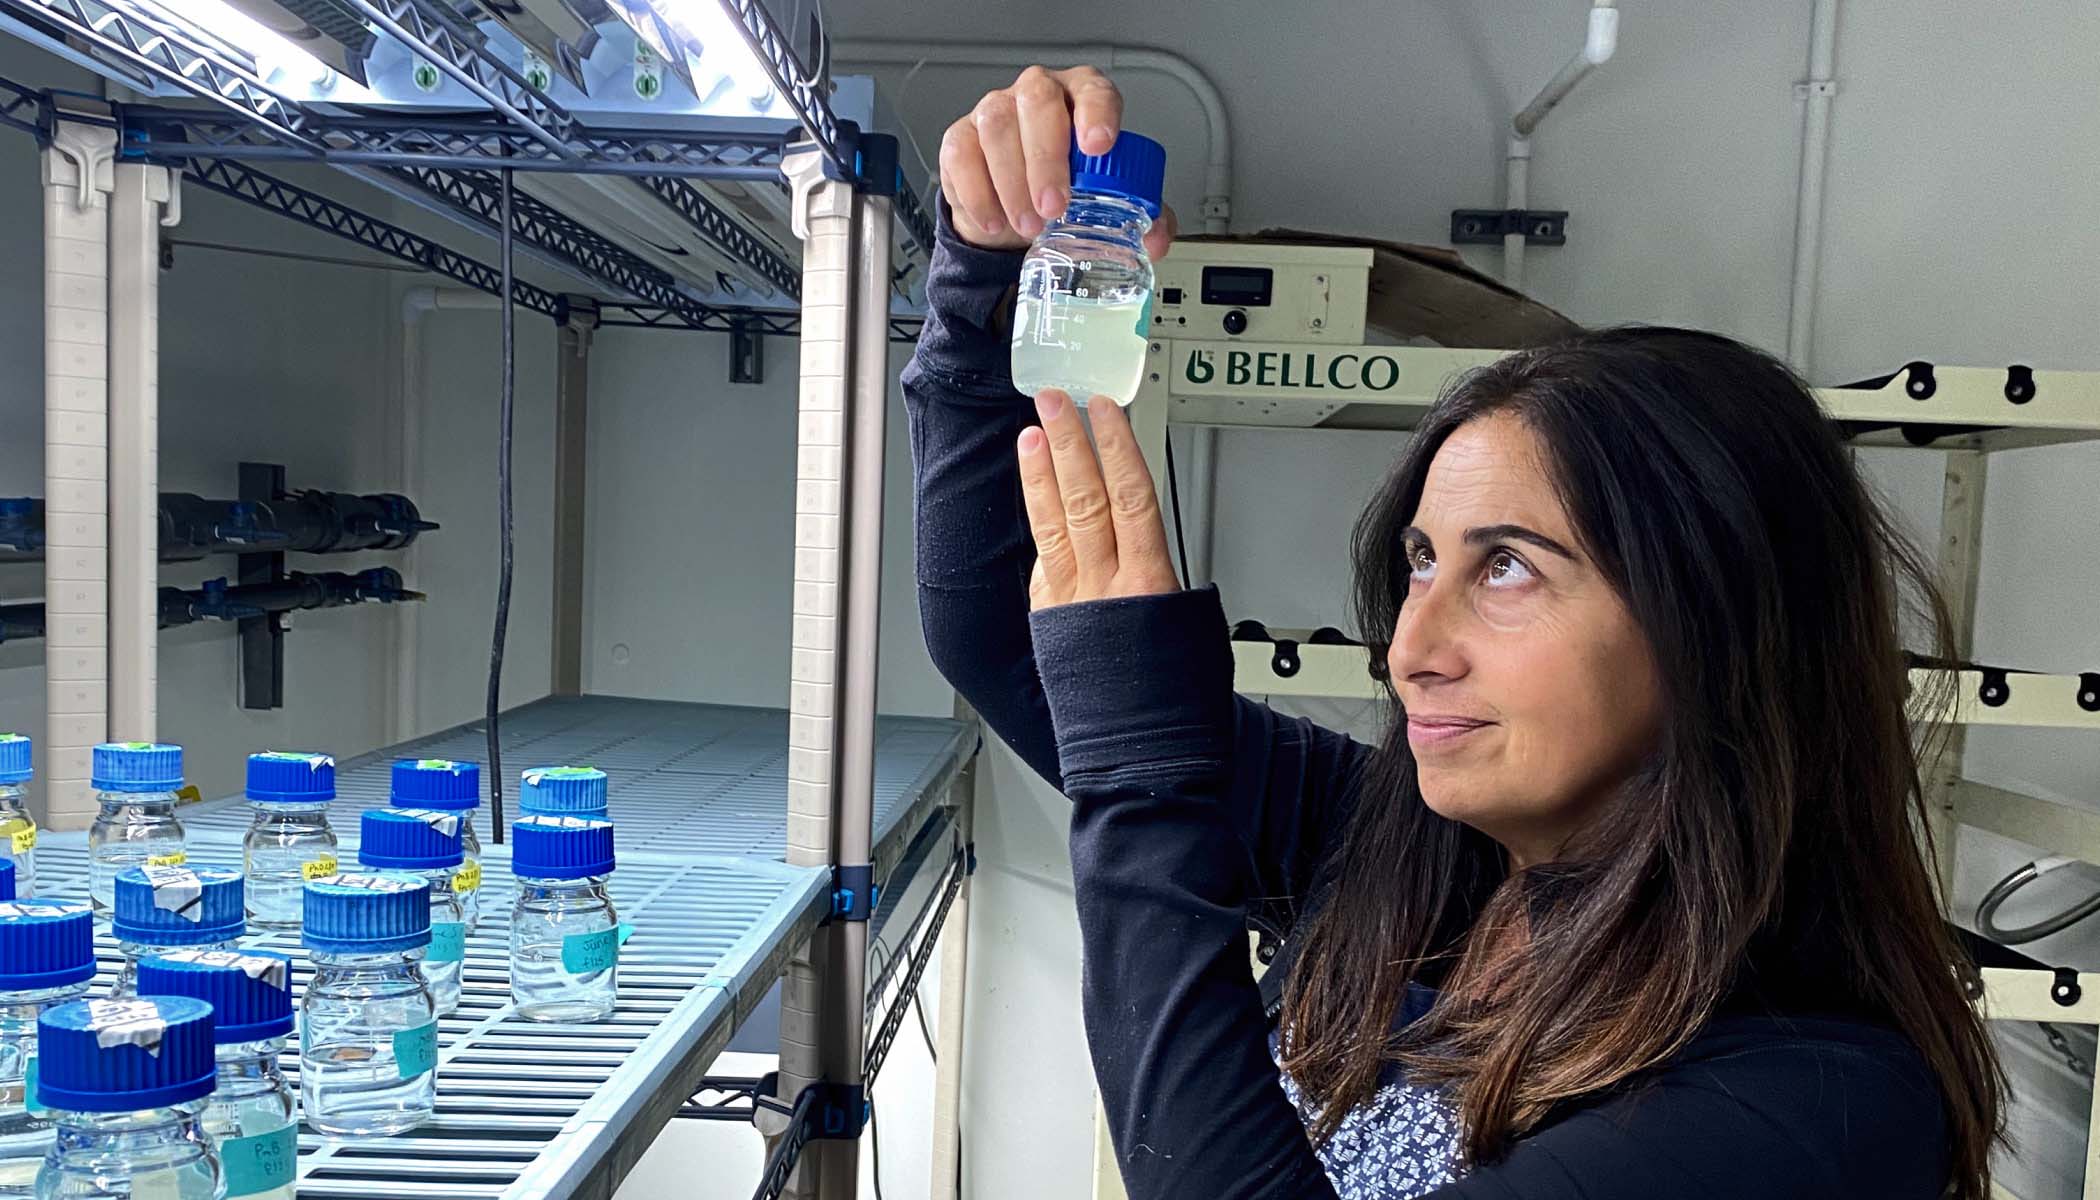 UCSB professor Débora Iglesias-Rodriguez looks closely at a bottle of liquid while in a lab.